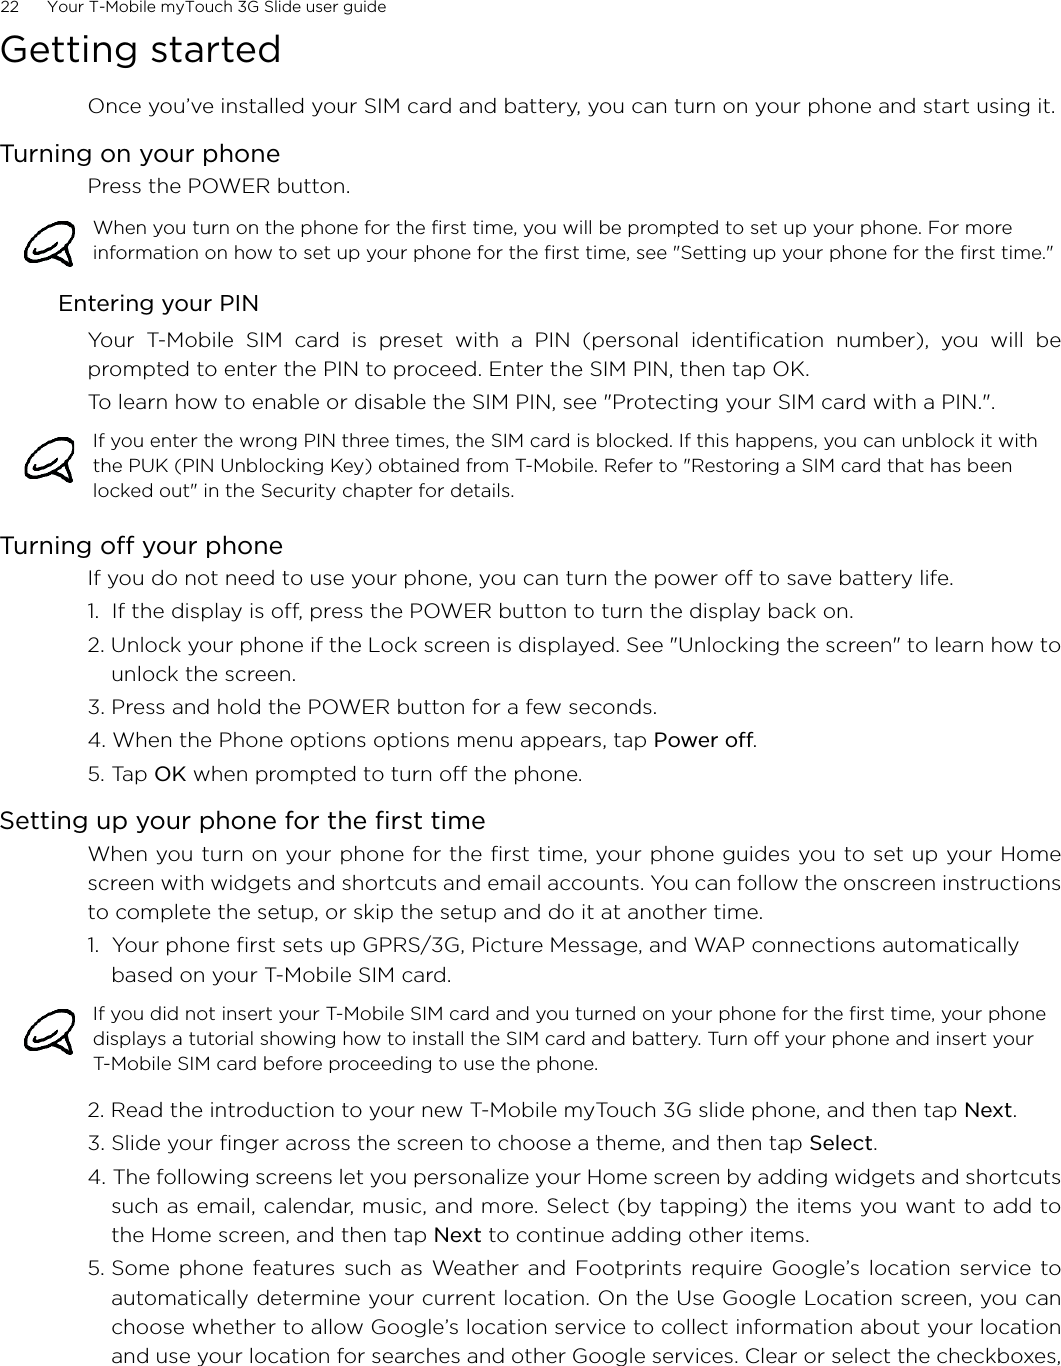 22      Your T-Mobile myTouch 3G Slide user guideGetting startedOnce you’ve installed your SIM card and battery, you can turn on your phone and start using it.Turning on your phonePress the POWER button.Entering your PIN Your T-Mobile SIM card is preset with a PIN (personal identification number), you will beprompted to enter the PIN to proceed. Enter the SIM PIN, then tap OK.To learn how to enable or disable the SIM PIN, see &quot;Protecting your SIM card with a PIN.&quot;.Turning off your phoneIf you do not need to use your phone, you can turn the power off to save battery life.1.  If the display is off, press the POWER button to turn the display back on.2. Unlock your phone if the Lock screen is displayed. See &quot;Unlocking the screen&quot; to learn how tounlock the screen.3. Press and hold the POWER button for a few seconds.4. When the Phone options options menu appears, tap Power off.5. Tap OK when prompted to turn off the phone.Setting up your phone for the first timeWhen you turn on your phone for the first time, your phone guides you to set up your Homescreen with widgets and shortcuts and email accounts. You can follow the onscreen instructionsto complete the setup, or skip the setup and do it at another time.1.  Your phone first sets up GPRS/3G, Picture Message, and WAP connections automatically based on your T-Mobile SIM card.2. Read the introduction to your new T-Mobile myTouch 3G slide phone, and then tap Next. 3. Slide your finger across the screen to choose a theme, and then tap Select.4. The following screens let you personalize your Home screen by adding widgets and shortcutssuch as email, calendar, music, and more. Select (by tapping) the items you want to add tothe Home screen, and then tap Next to continue adding other items.5. Some phone features such as Weather and Footprints require Google’s location service toautomatically determine your current location. On the Use Google Location screen, you canchoose whether to allow Google’s location service to collect information about your locationand use your location for searches and other Google services. Clear or select the checkboxes,When you turn on the phone for the first time, you will be prompted to set up your phone. For more information on how to set up your phone for the first time, see &quot;Setting up your phone for the first time.&quot;If you enter the wrong PIN three times, the SIM card is blocked. If this happens, you can unblock it with the PUK (PIN Unblocking Key) obtained from T-Mobile. Refer to &quot;Restoring a SIM card that has been locked out&quot; in the Security chapter for details. If you did not insert your T-Mobile SIM card and you turned on your phone for the first time, your phone displays a tutorial showing how to install the SIM card and battery. Turn off your phone and insert your T-Mobile SIM card before proceeding to use the phone. 